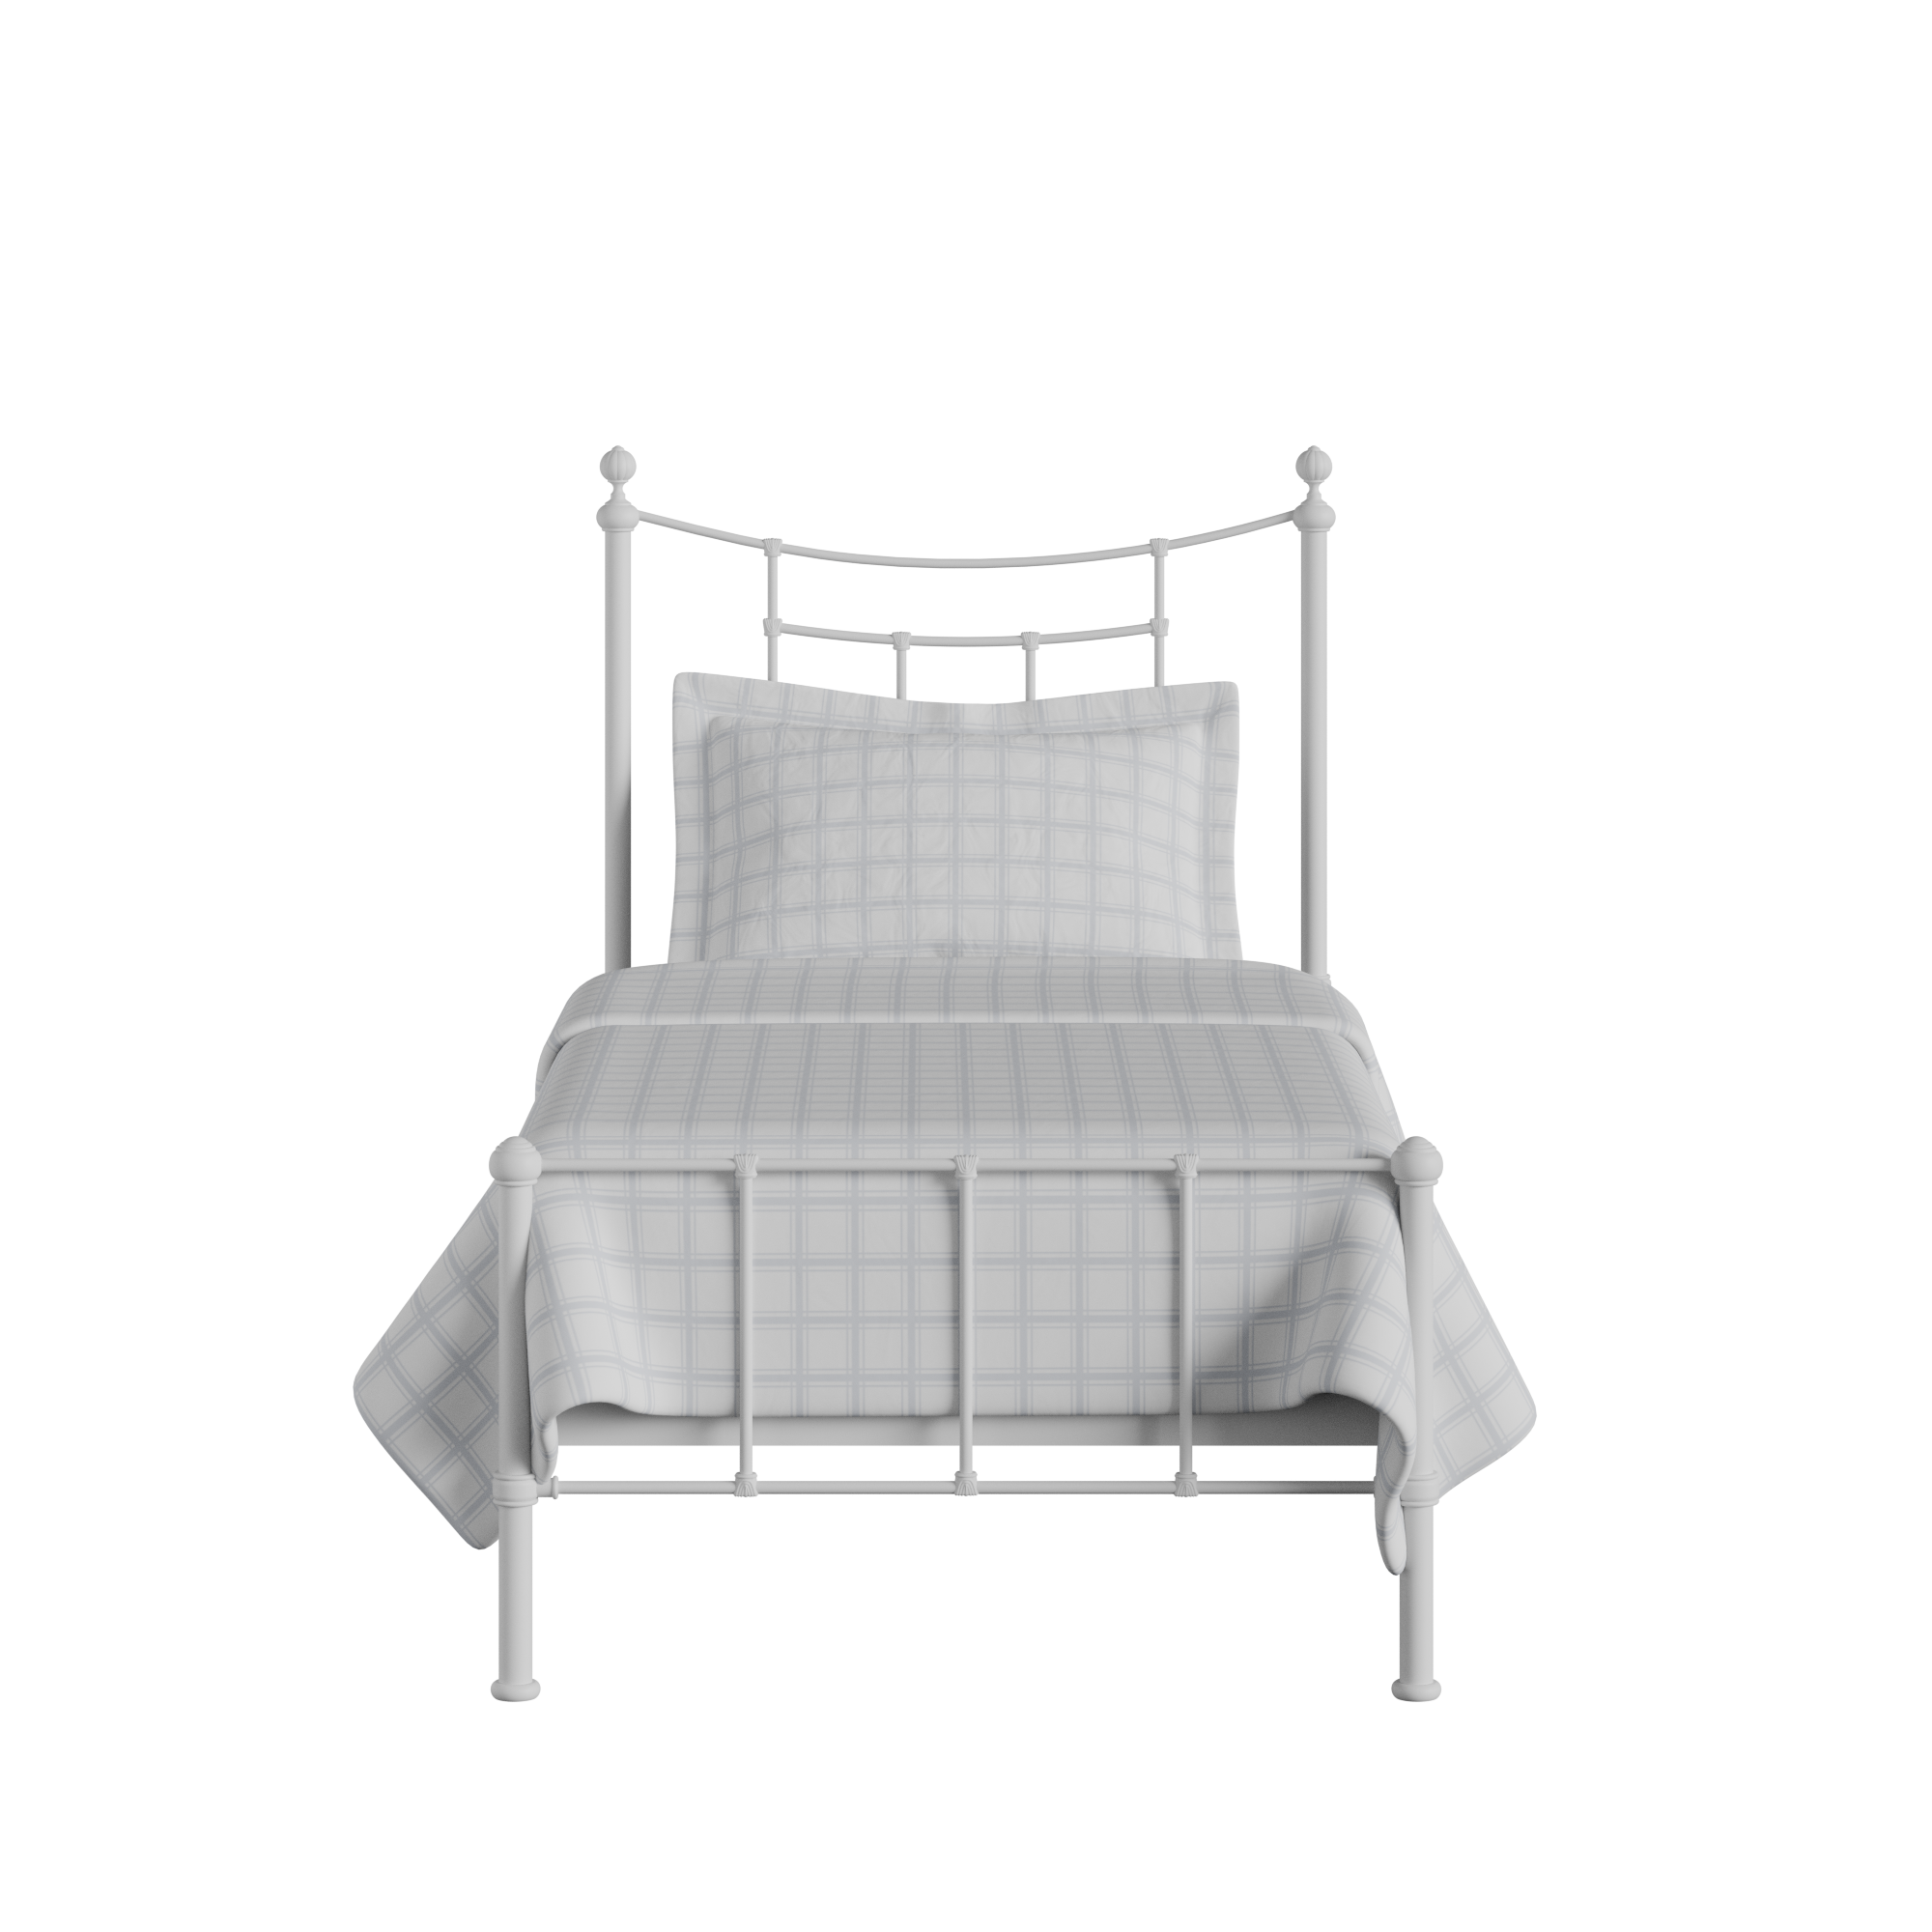 Isabelle iron/metal single bed in white